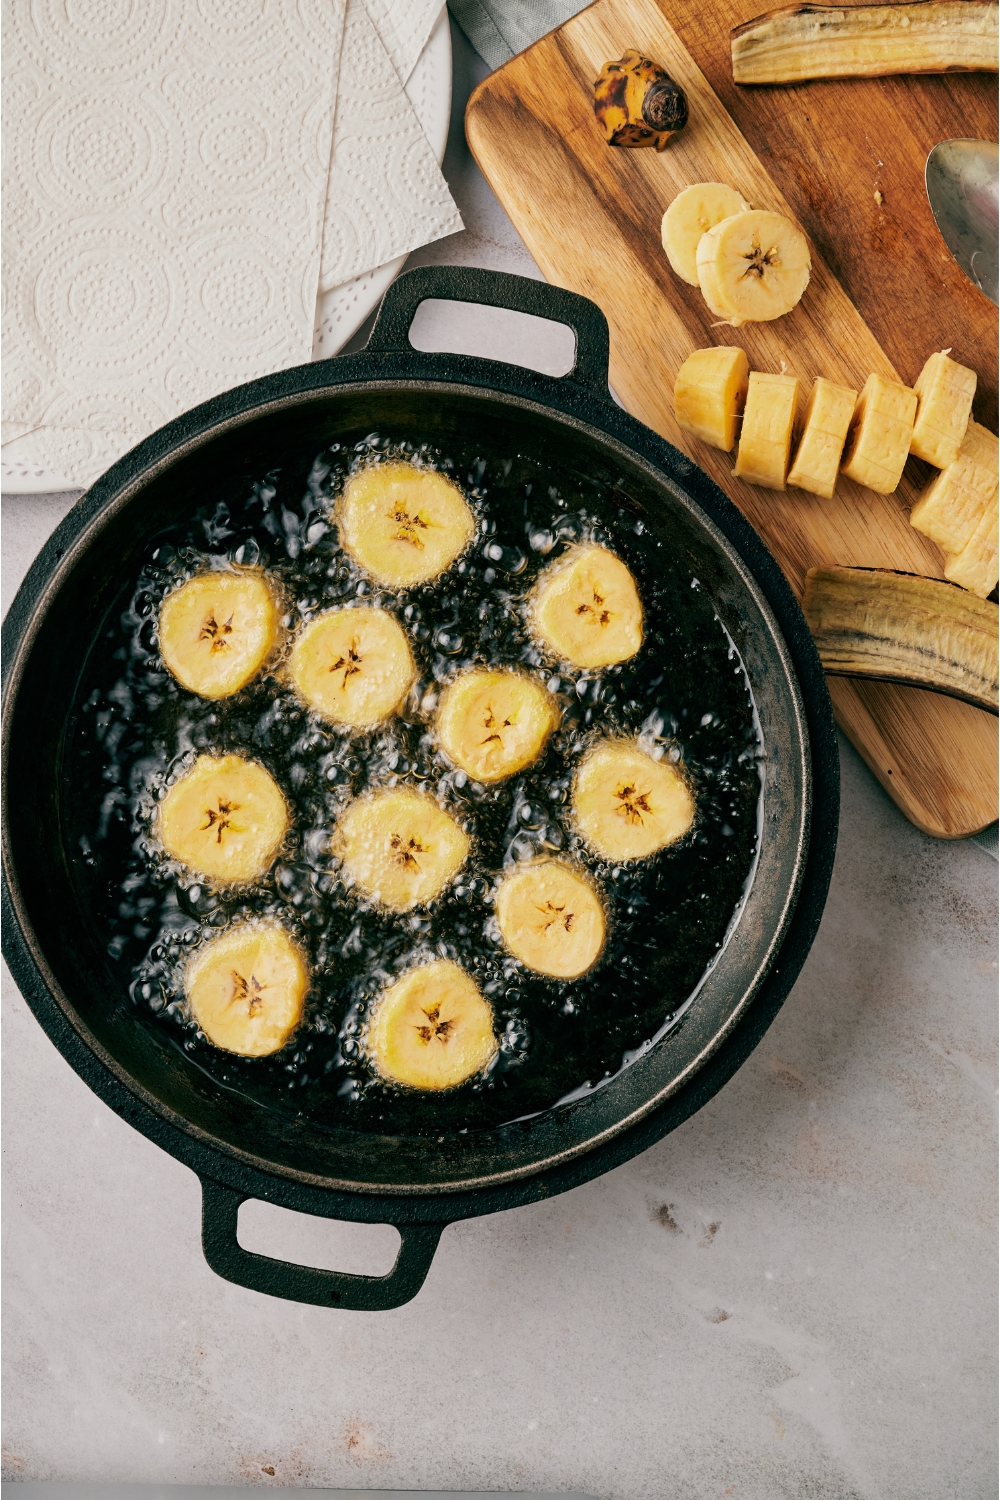 A black skillet filled with plantain slices frying in bubbling oil.